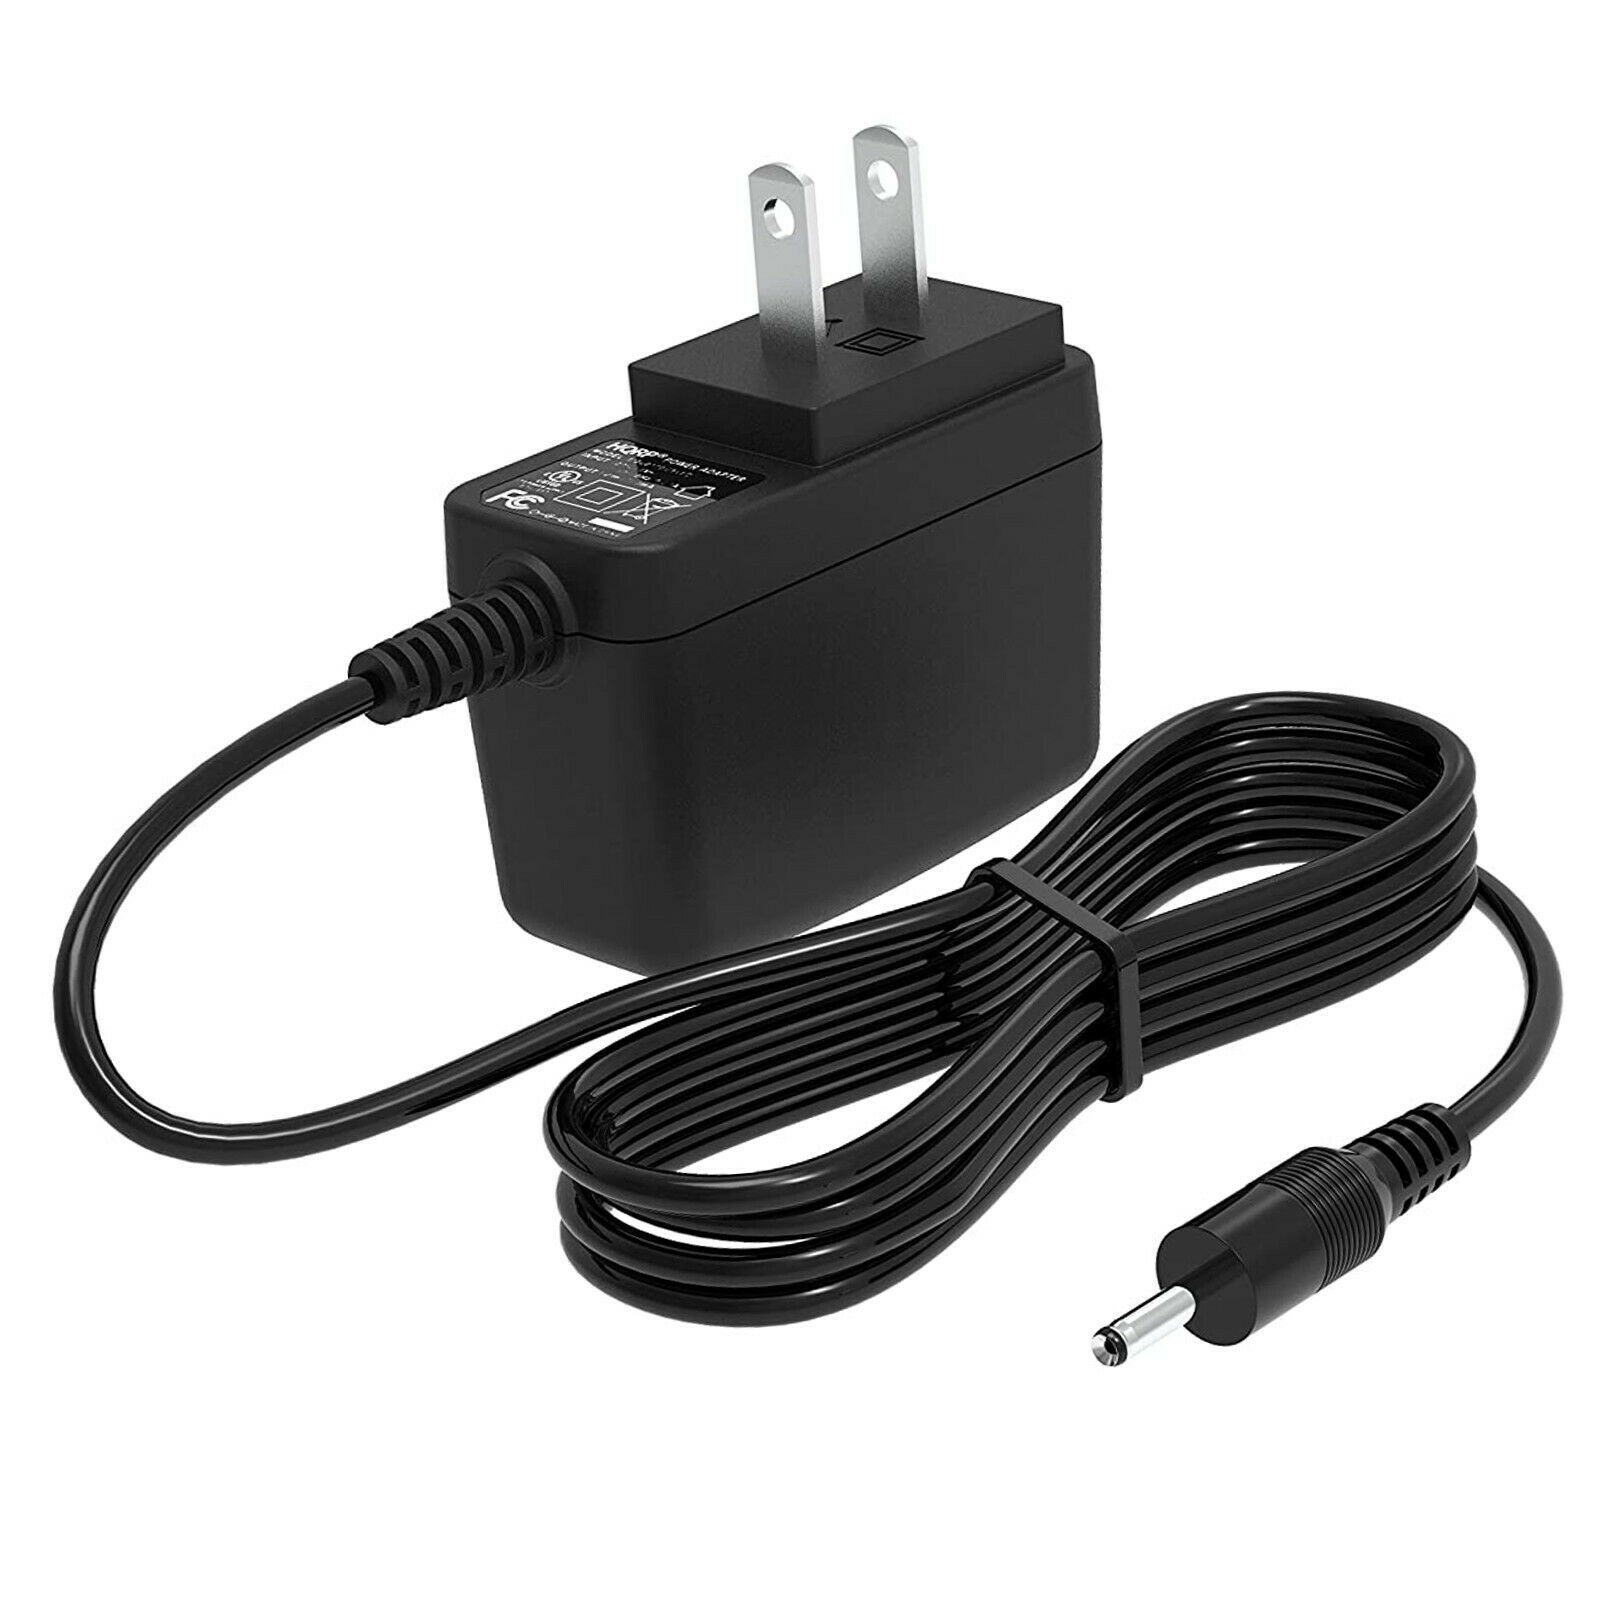 HQRP AC Adapter for Wahl 9854L, 97581-405, 97581-1105, S003HU0420060 Charger - $16.38